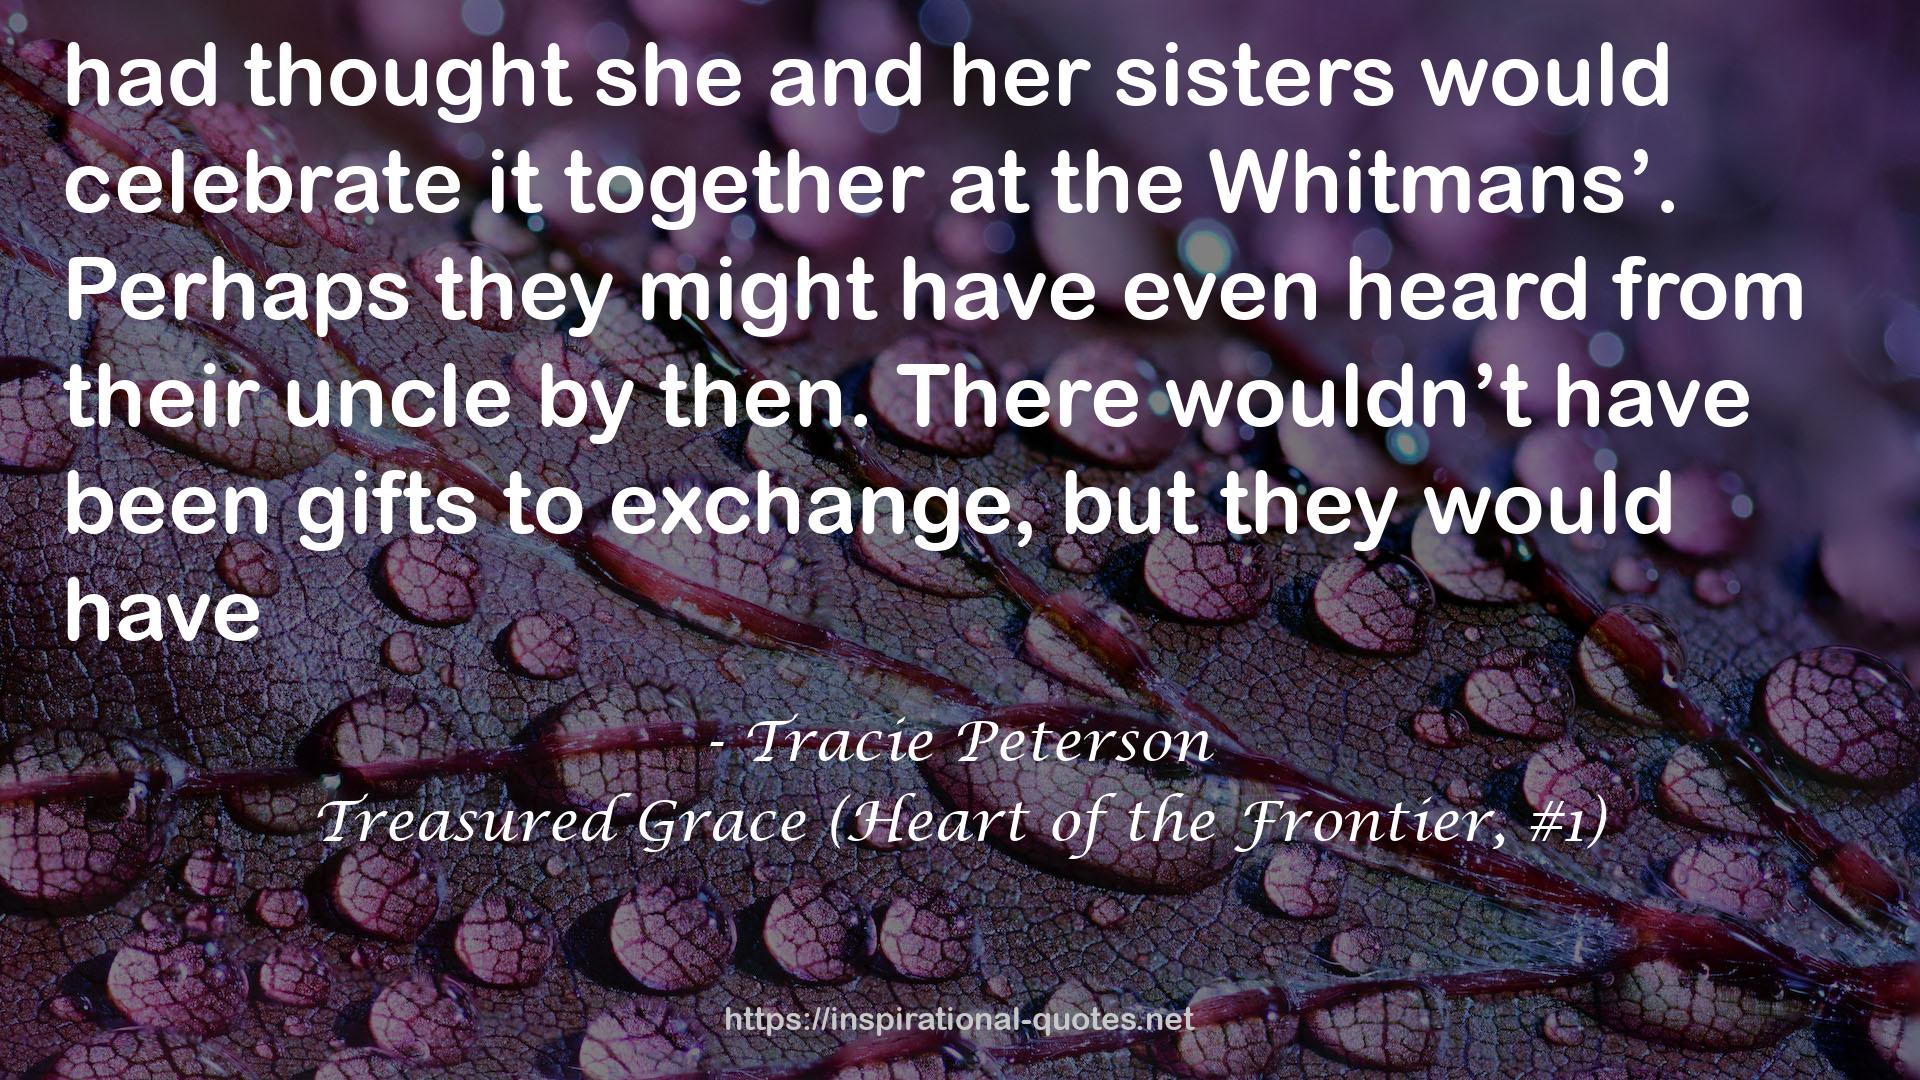 Treasured Grace (Heart of the Frontier, #1) QUOTES